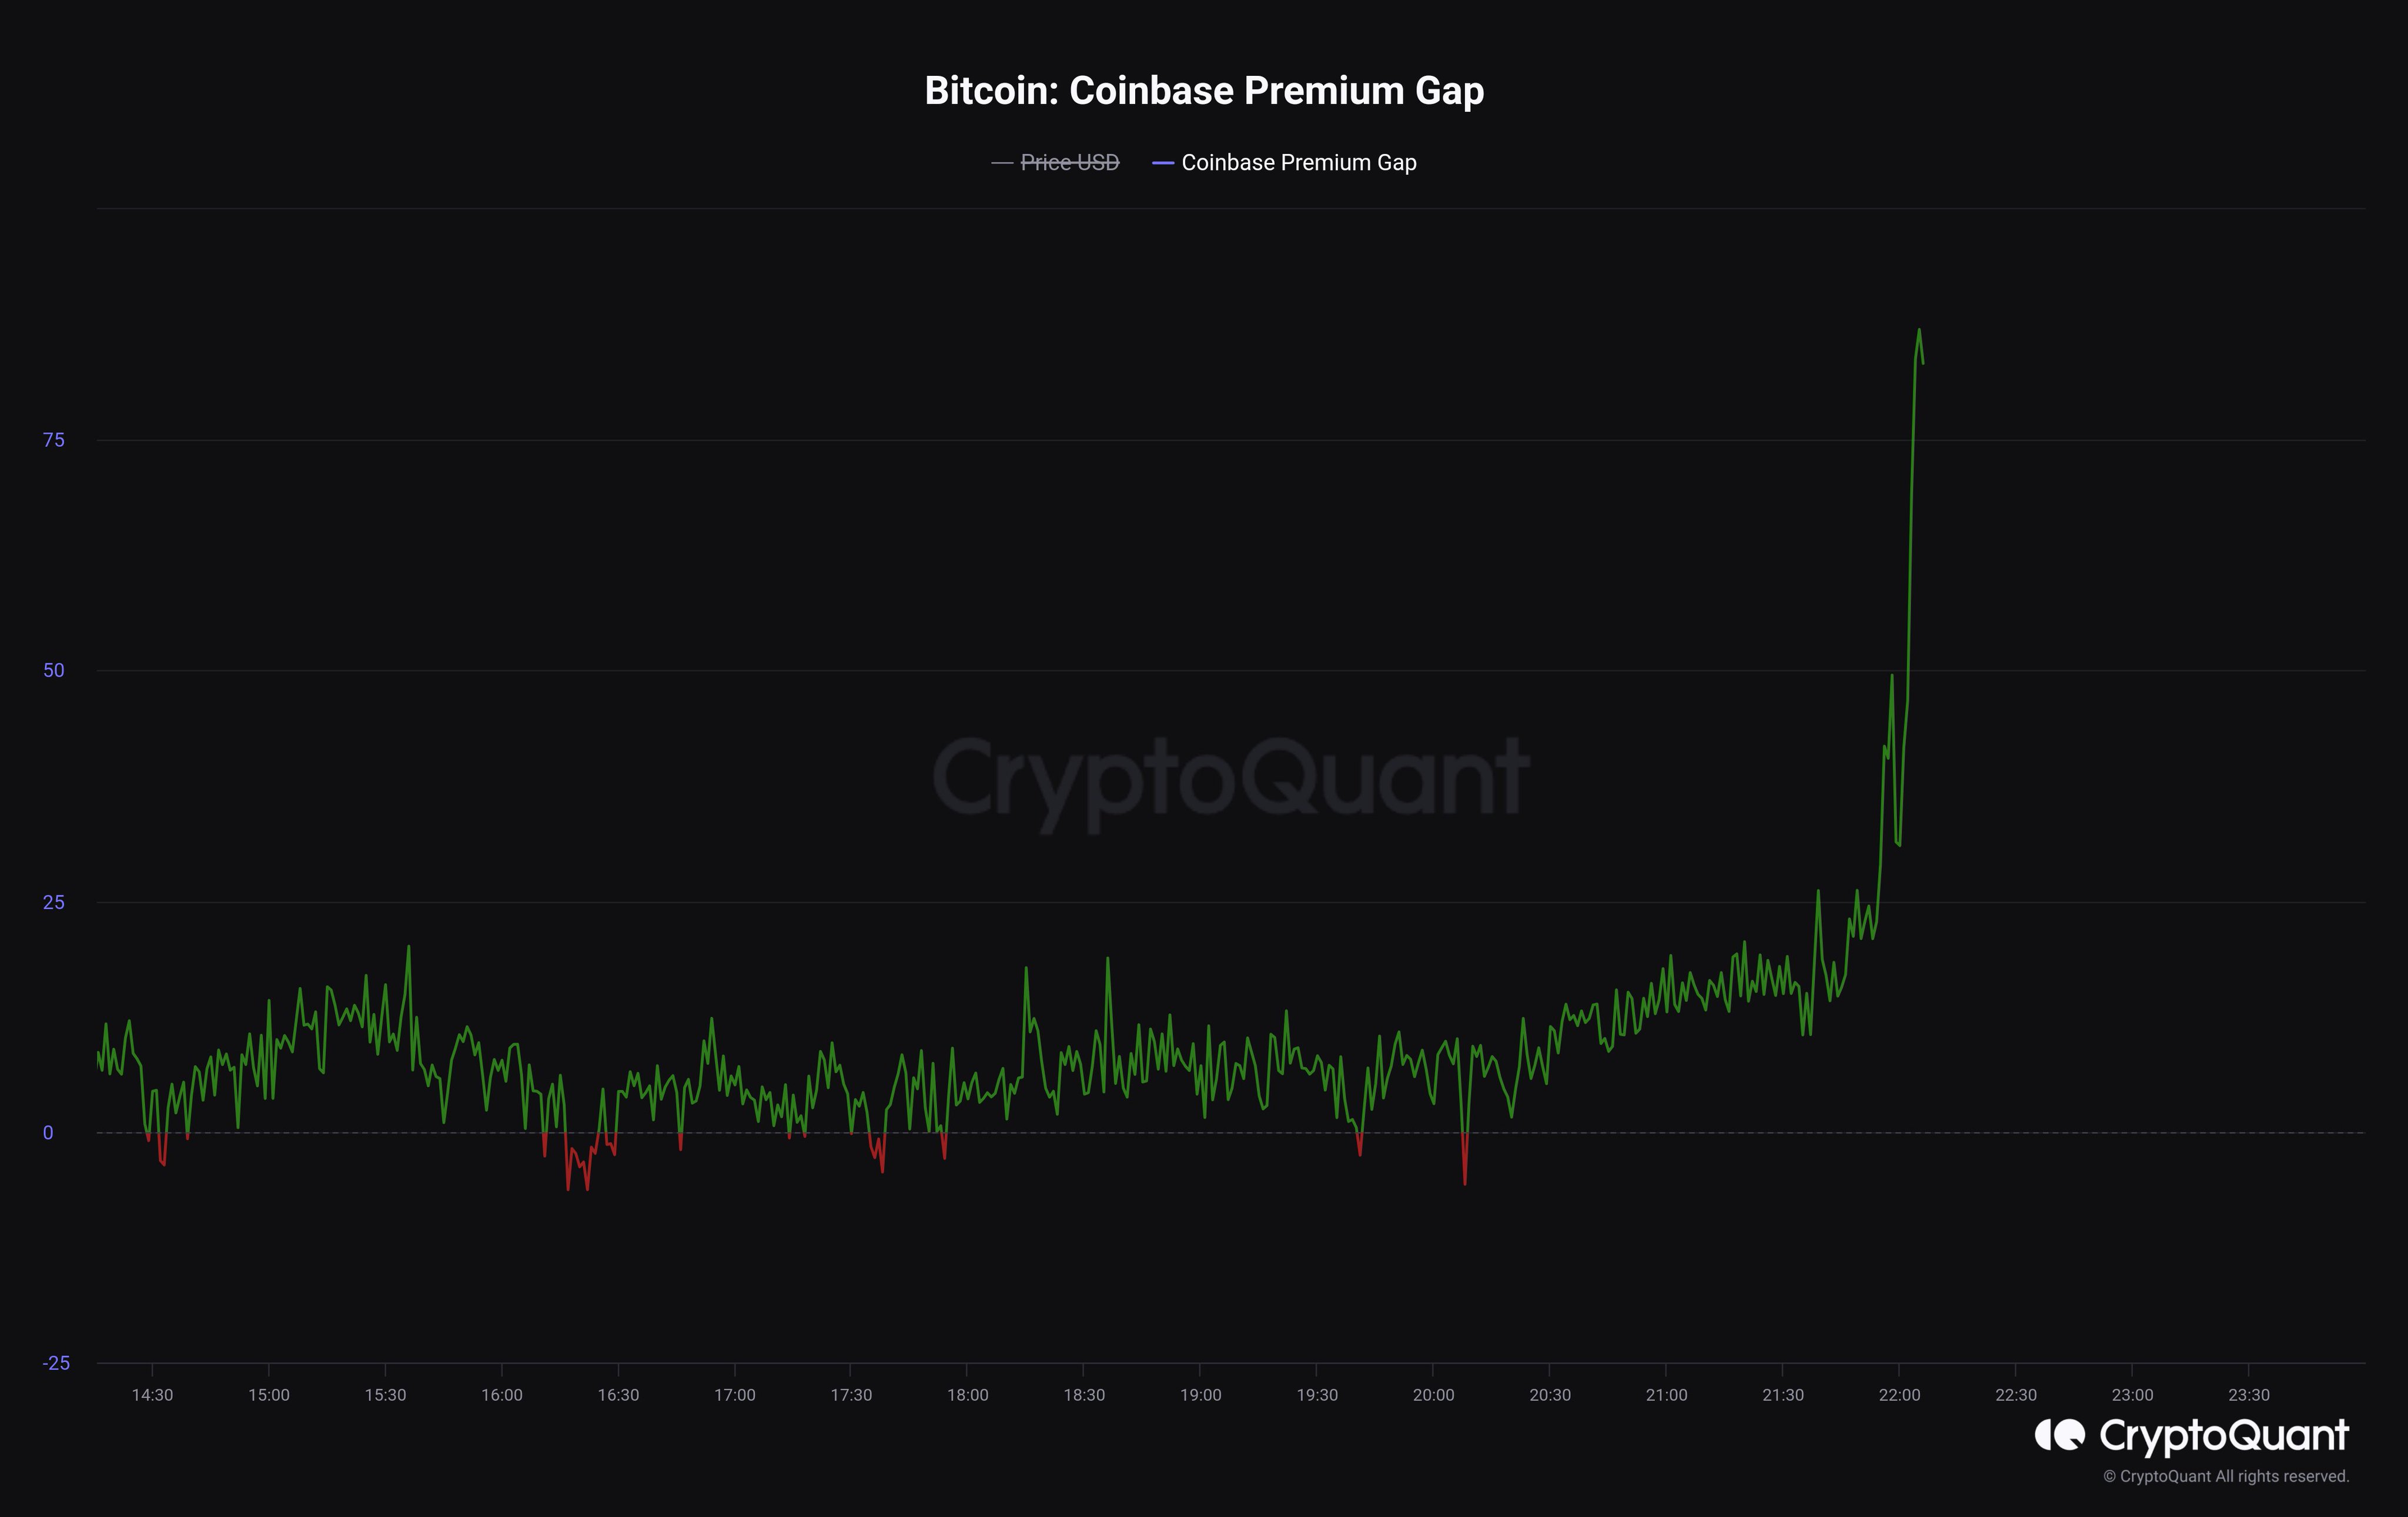 Bitcoin Coinbase Premium Gap Shoots Up, What Does It Mean?